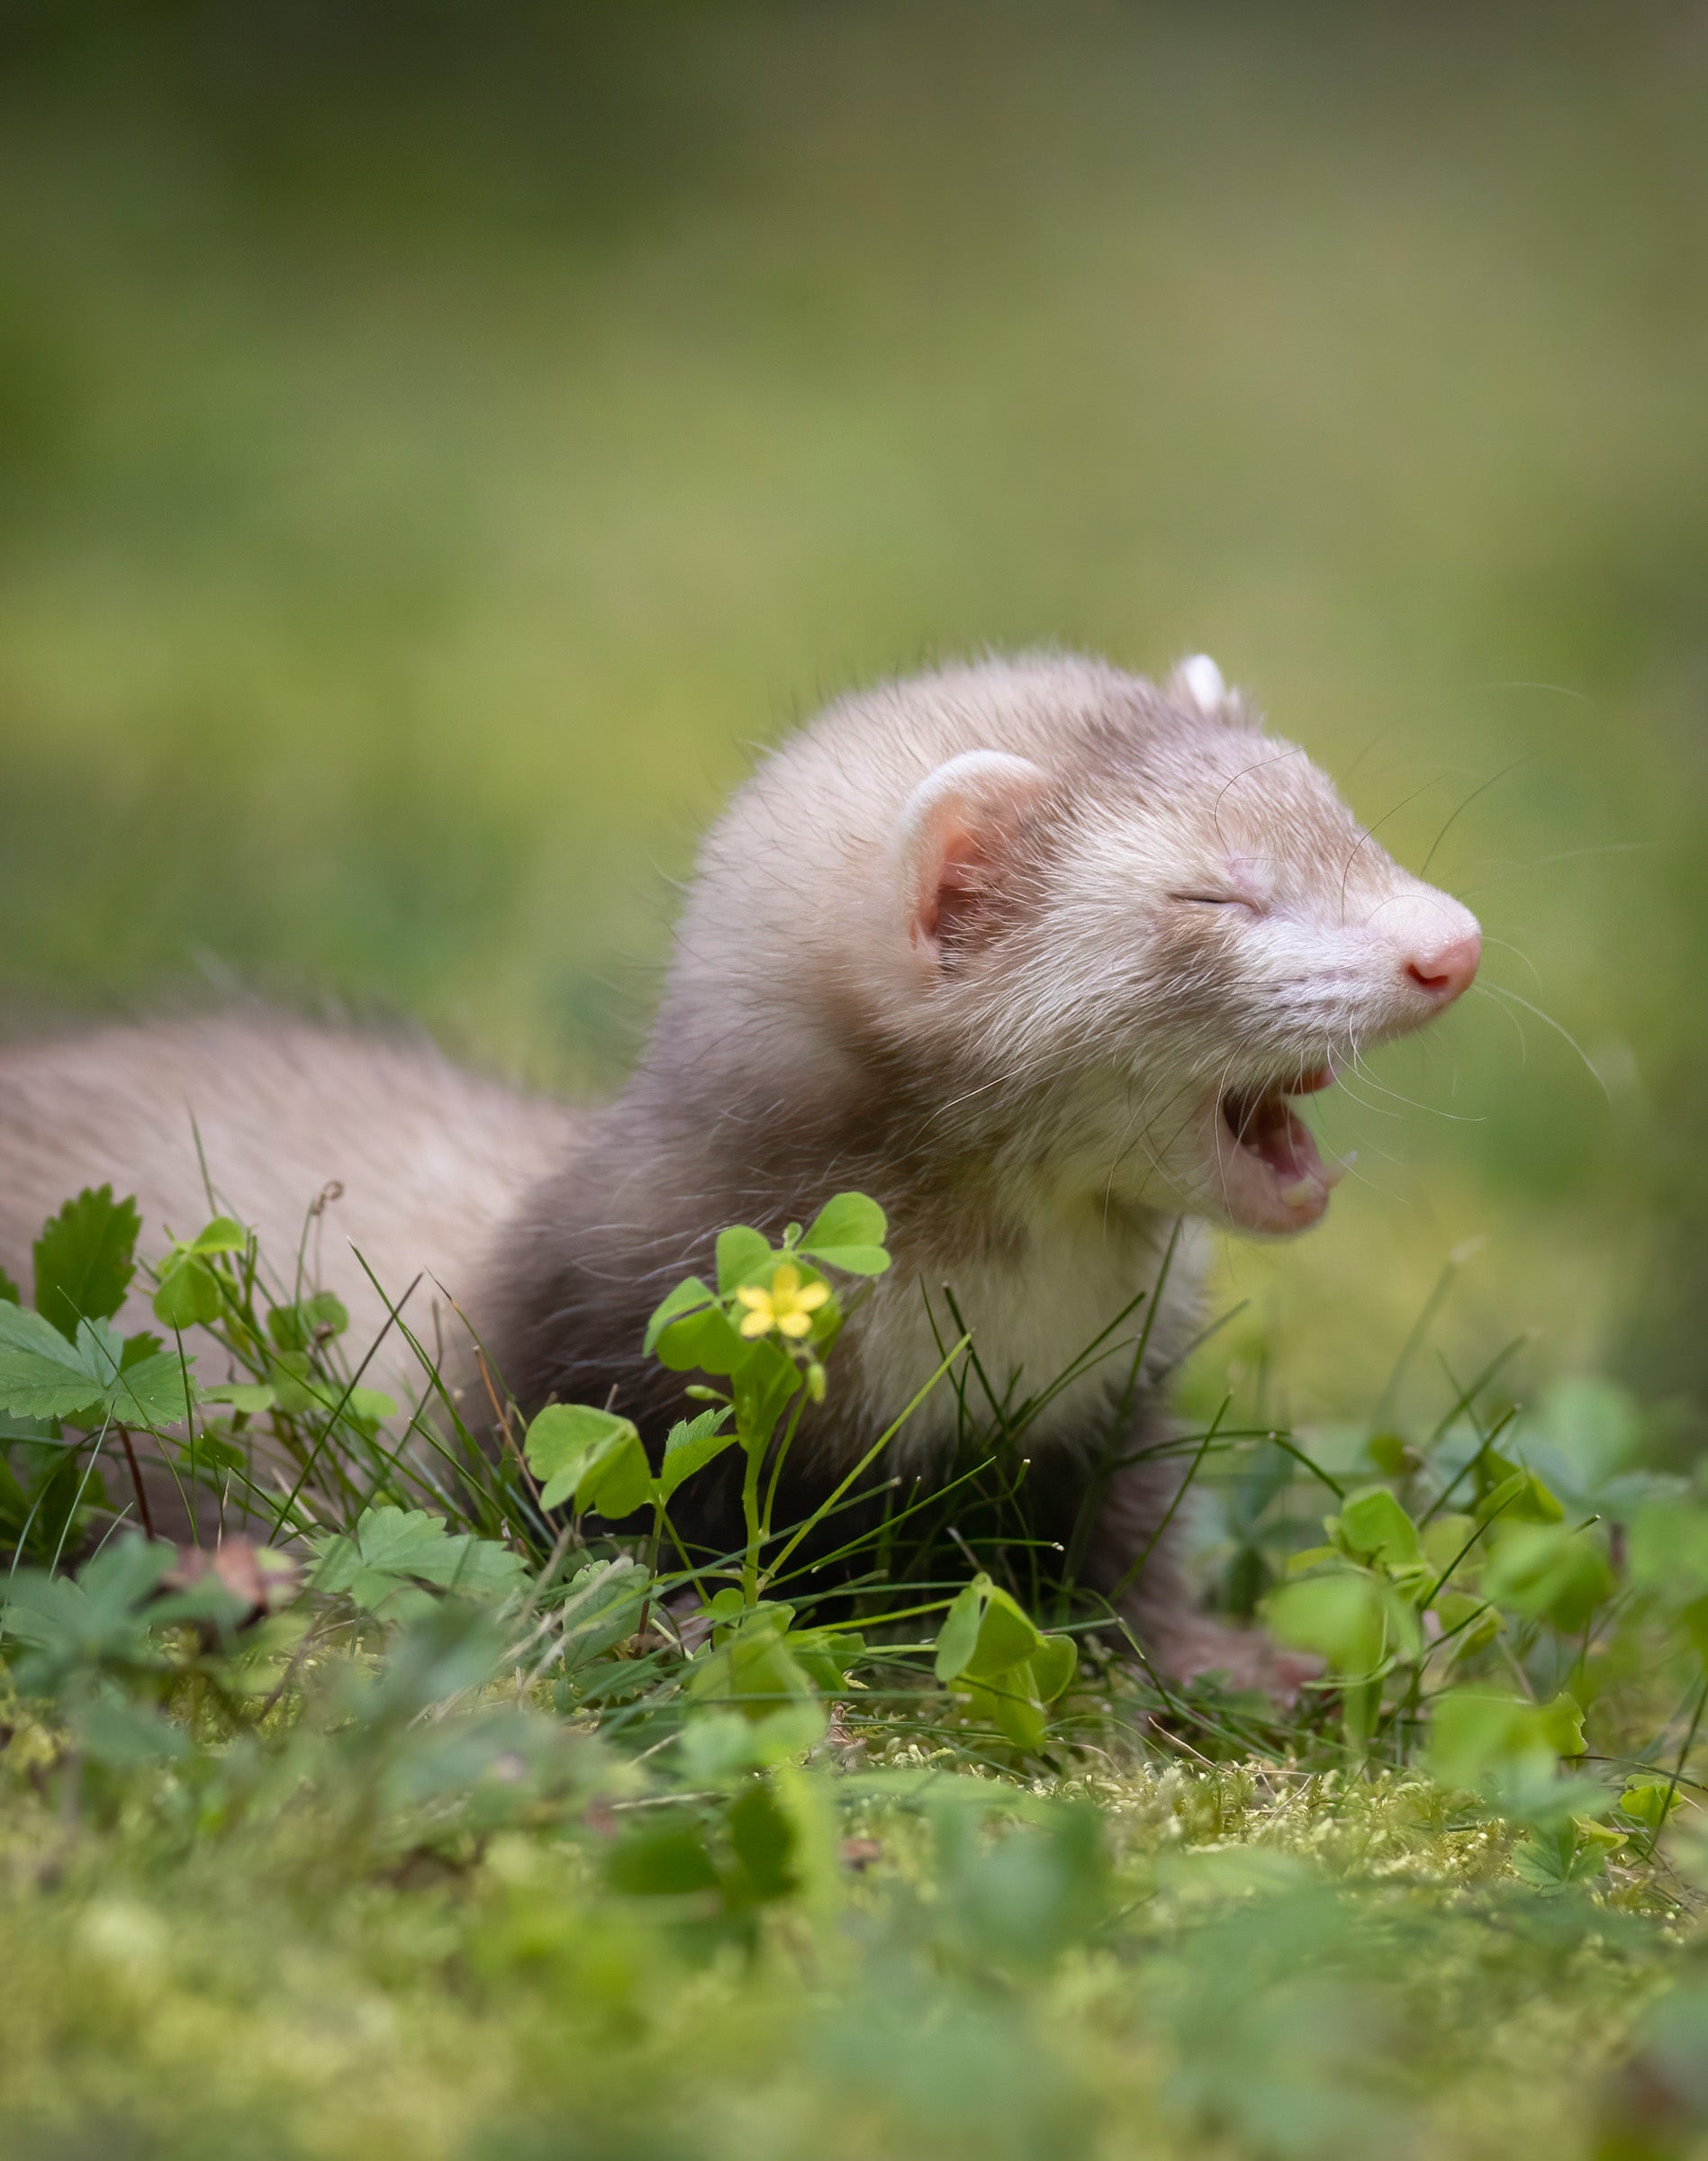 A tiny ferret yawns while in a green field.